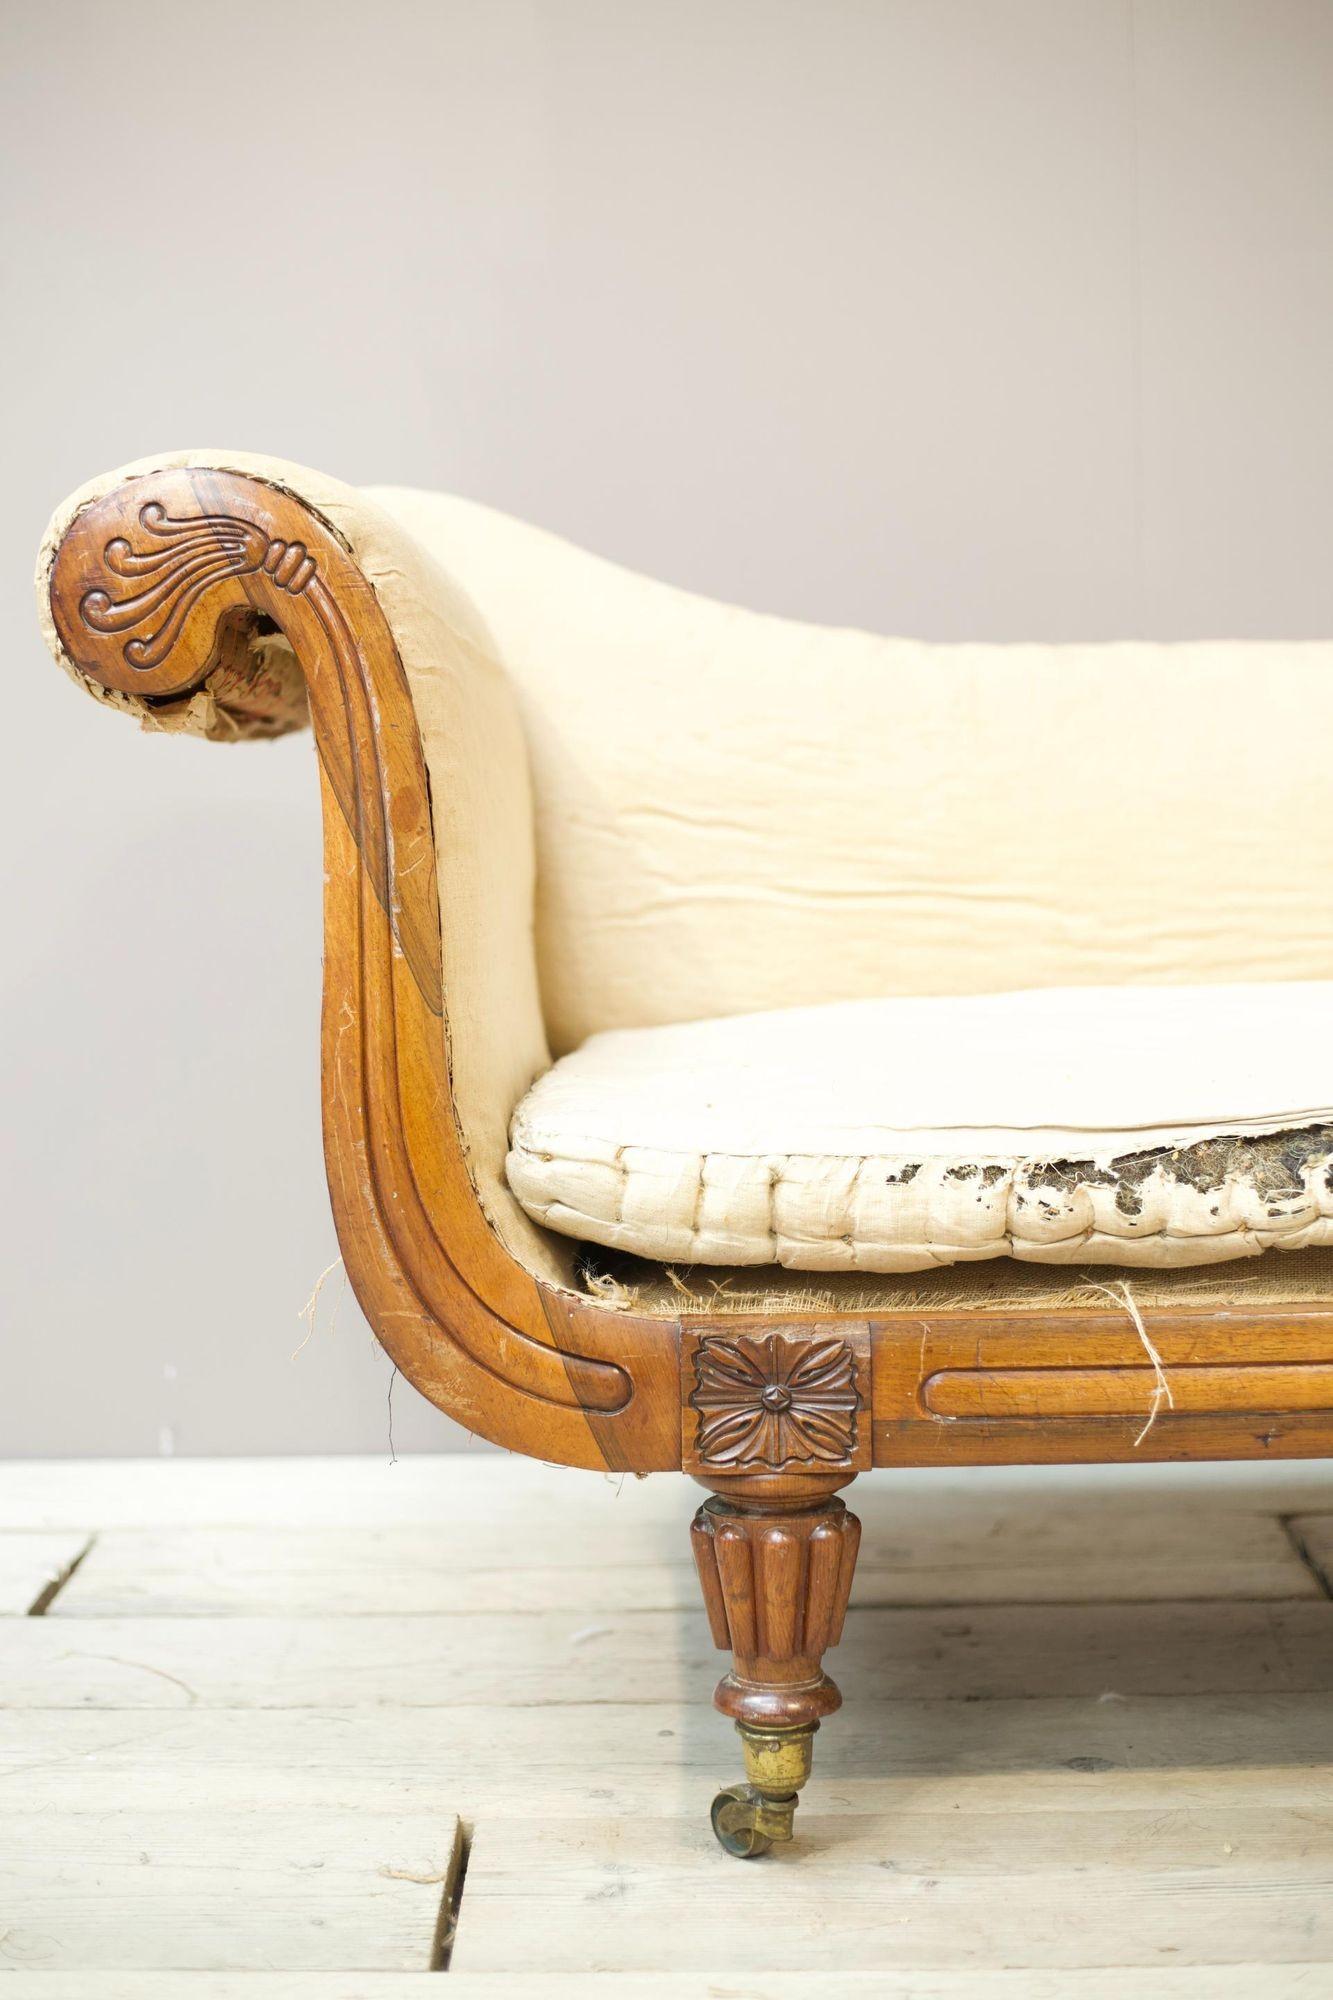 This is a superb quality Regency period chaise long. Stunning design that although 200 years old still remains Classic and suitable for a large number of interiors. Rosewood frame with wonderful carved legs. The whole piece is so elegant.
